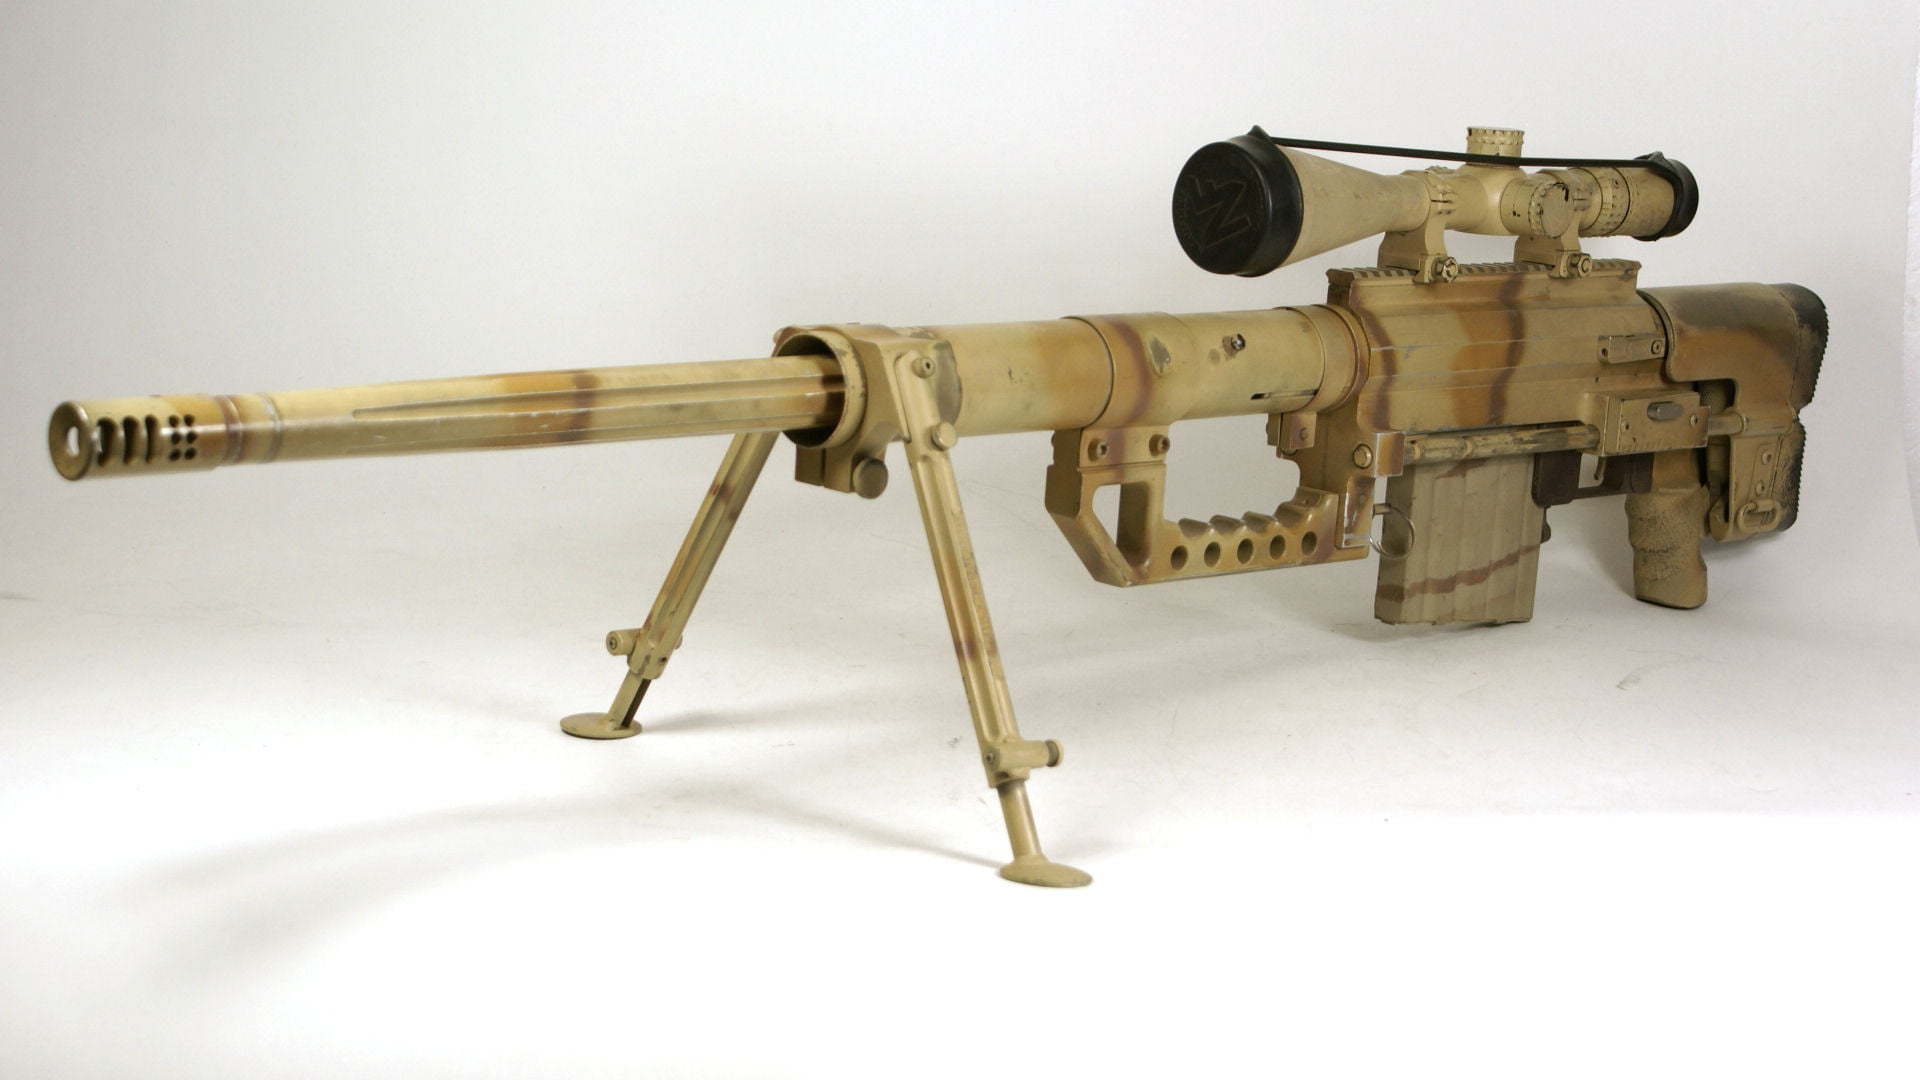 brown rifle with sniper, USA, sniper rifle, Chey, m200, Tac, .408 CheyTac